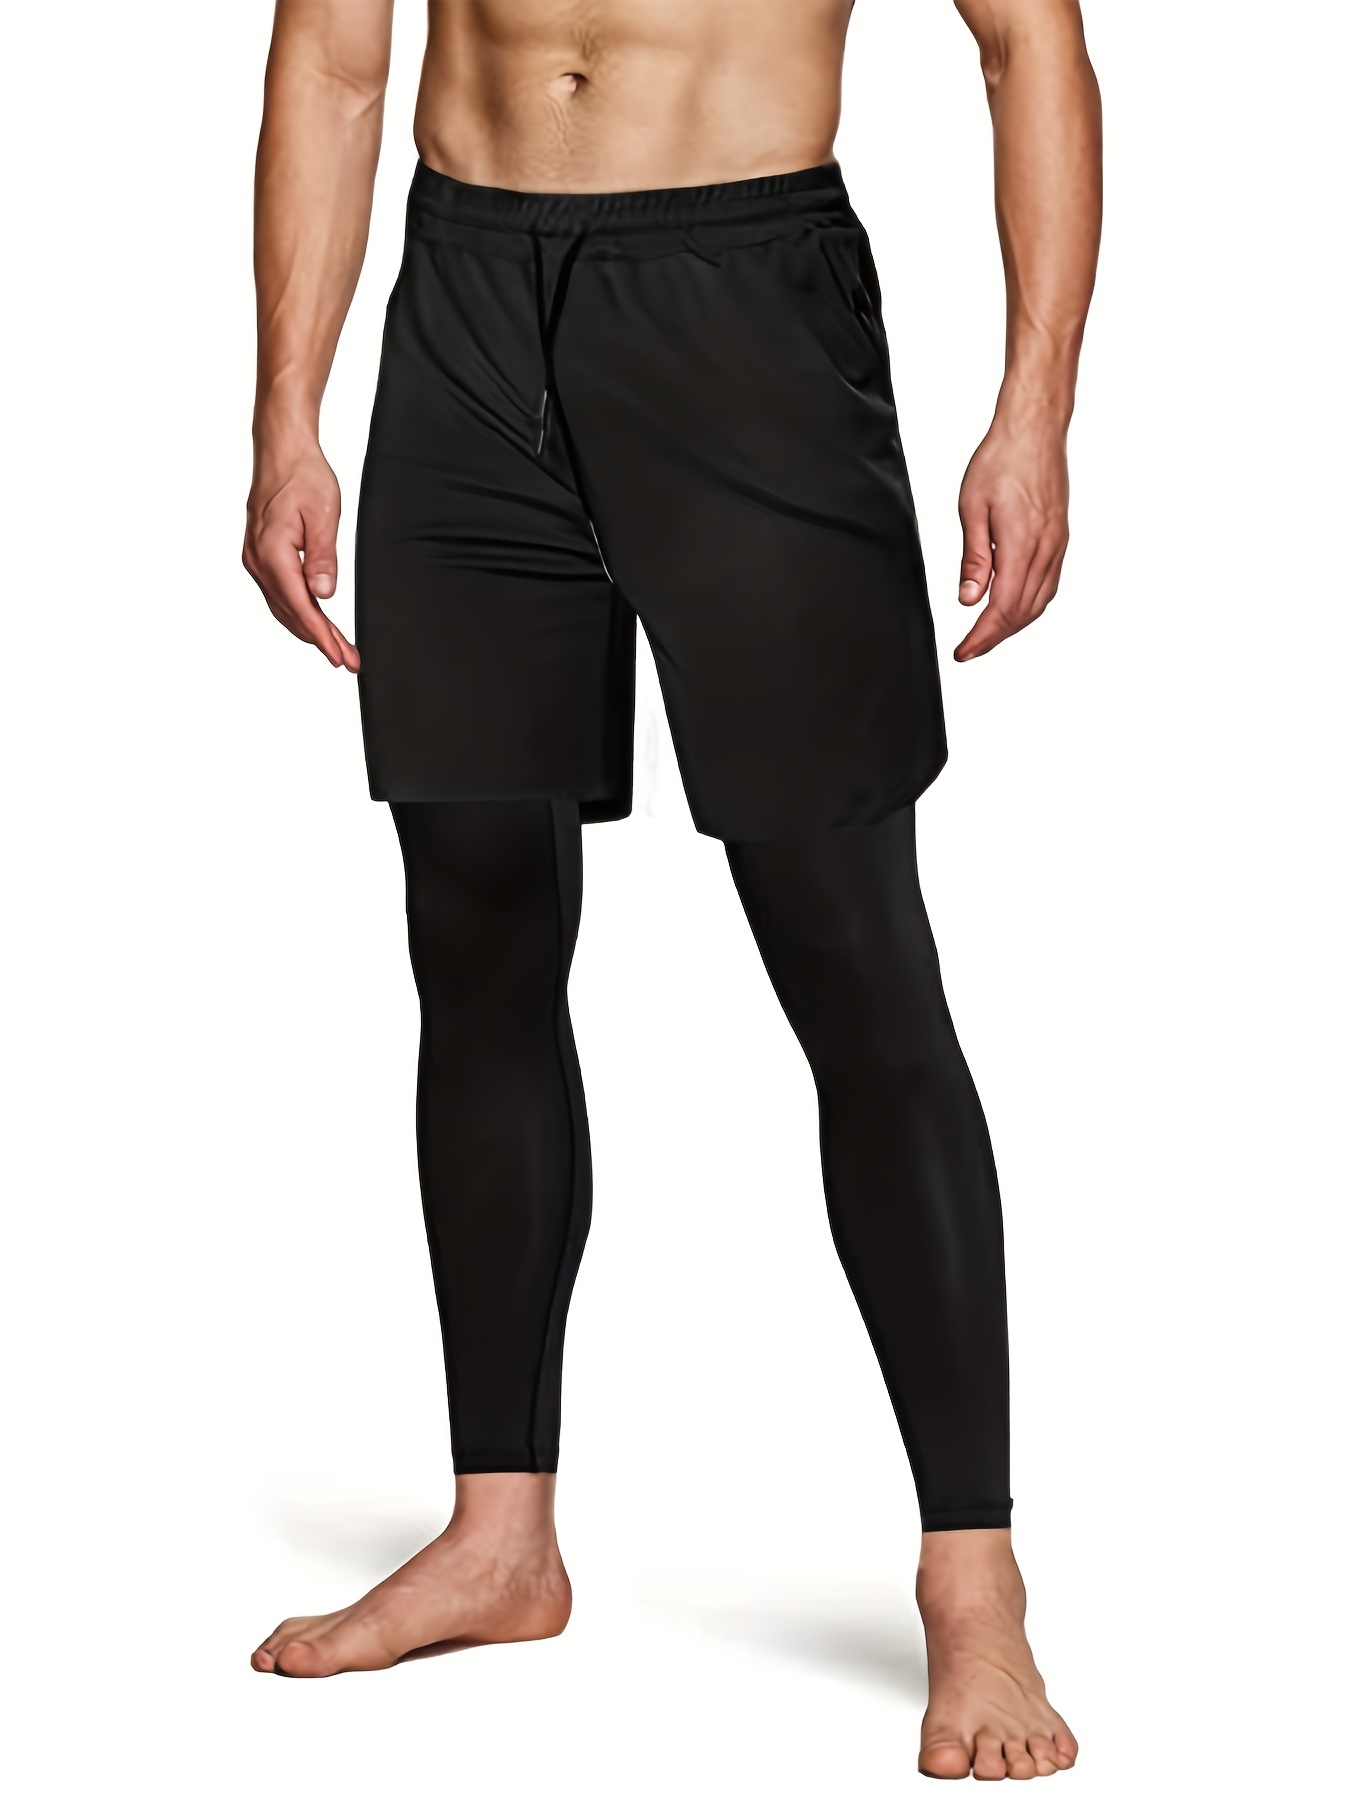 * Men's 2-in-1 Workout Shorts With Pocket, Active High Stretch Compression  Pants With Shorts For Fitness